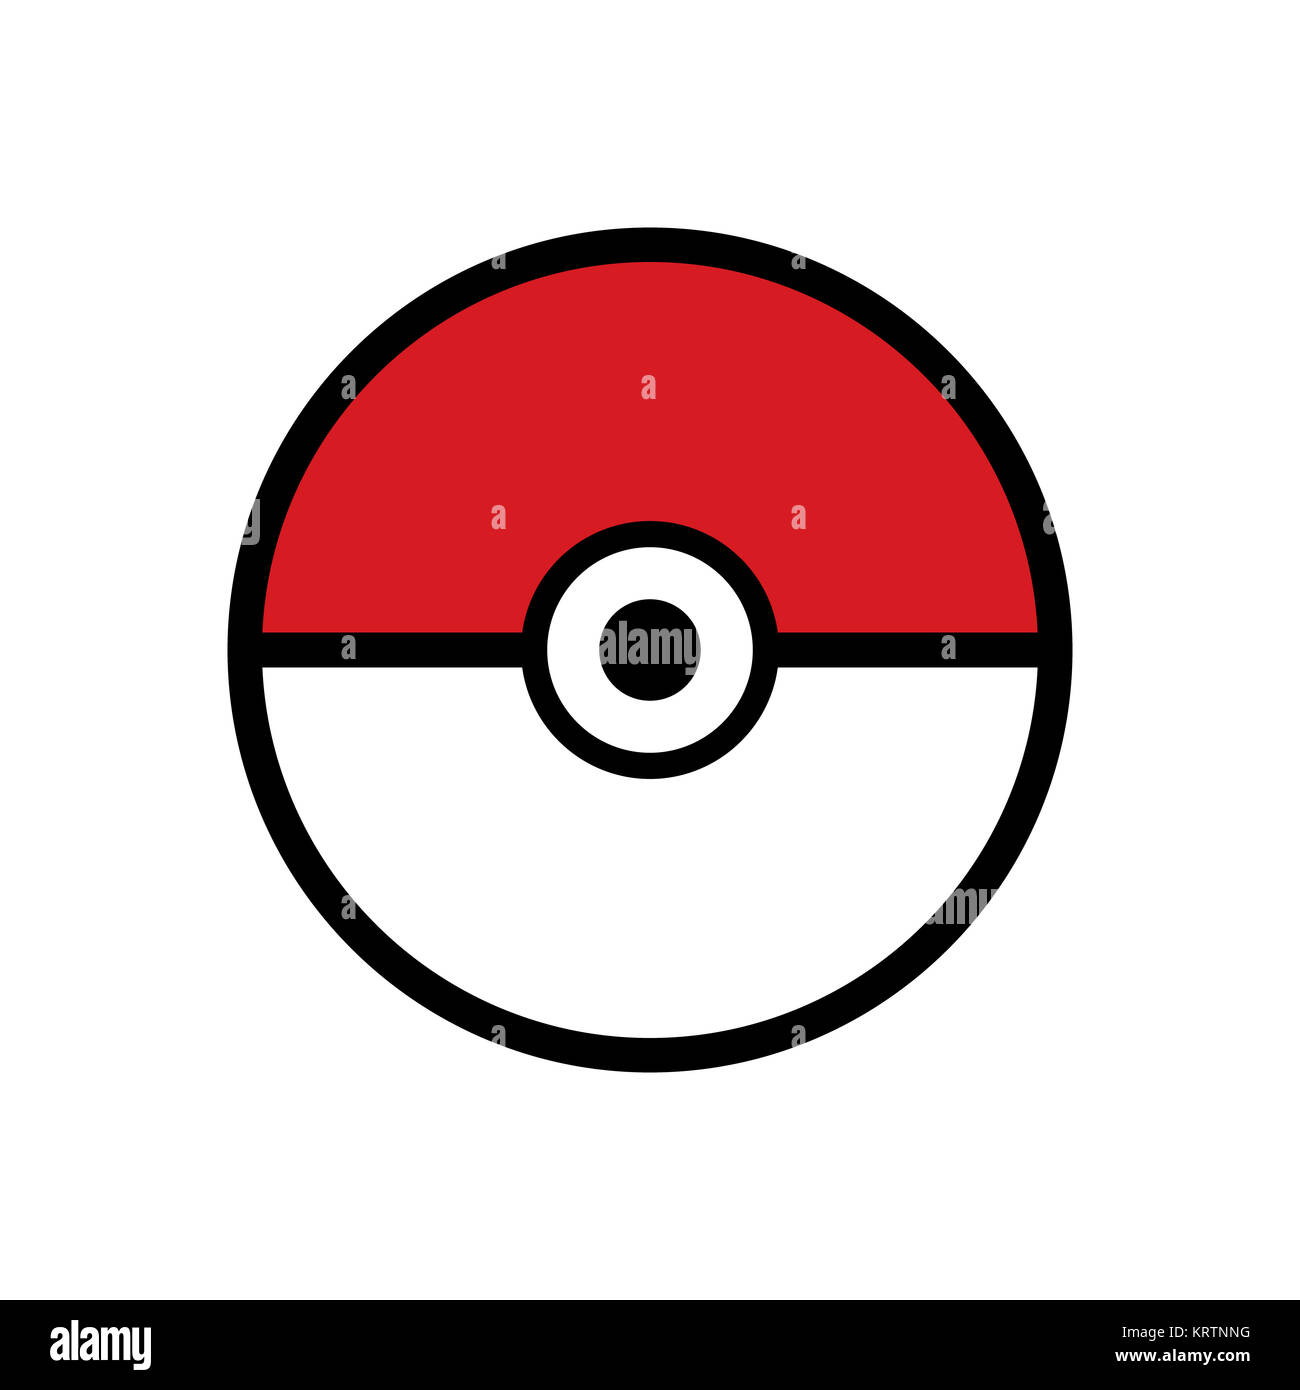 Pokeball Cut Out Stock Images & Pictures - Alamy